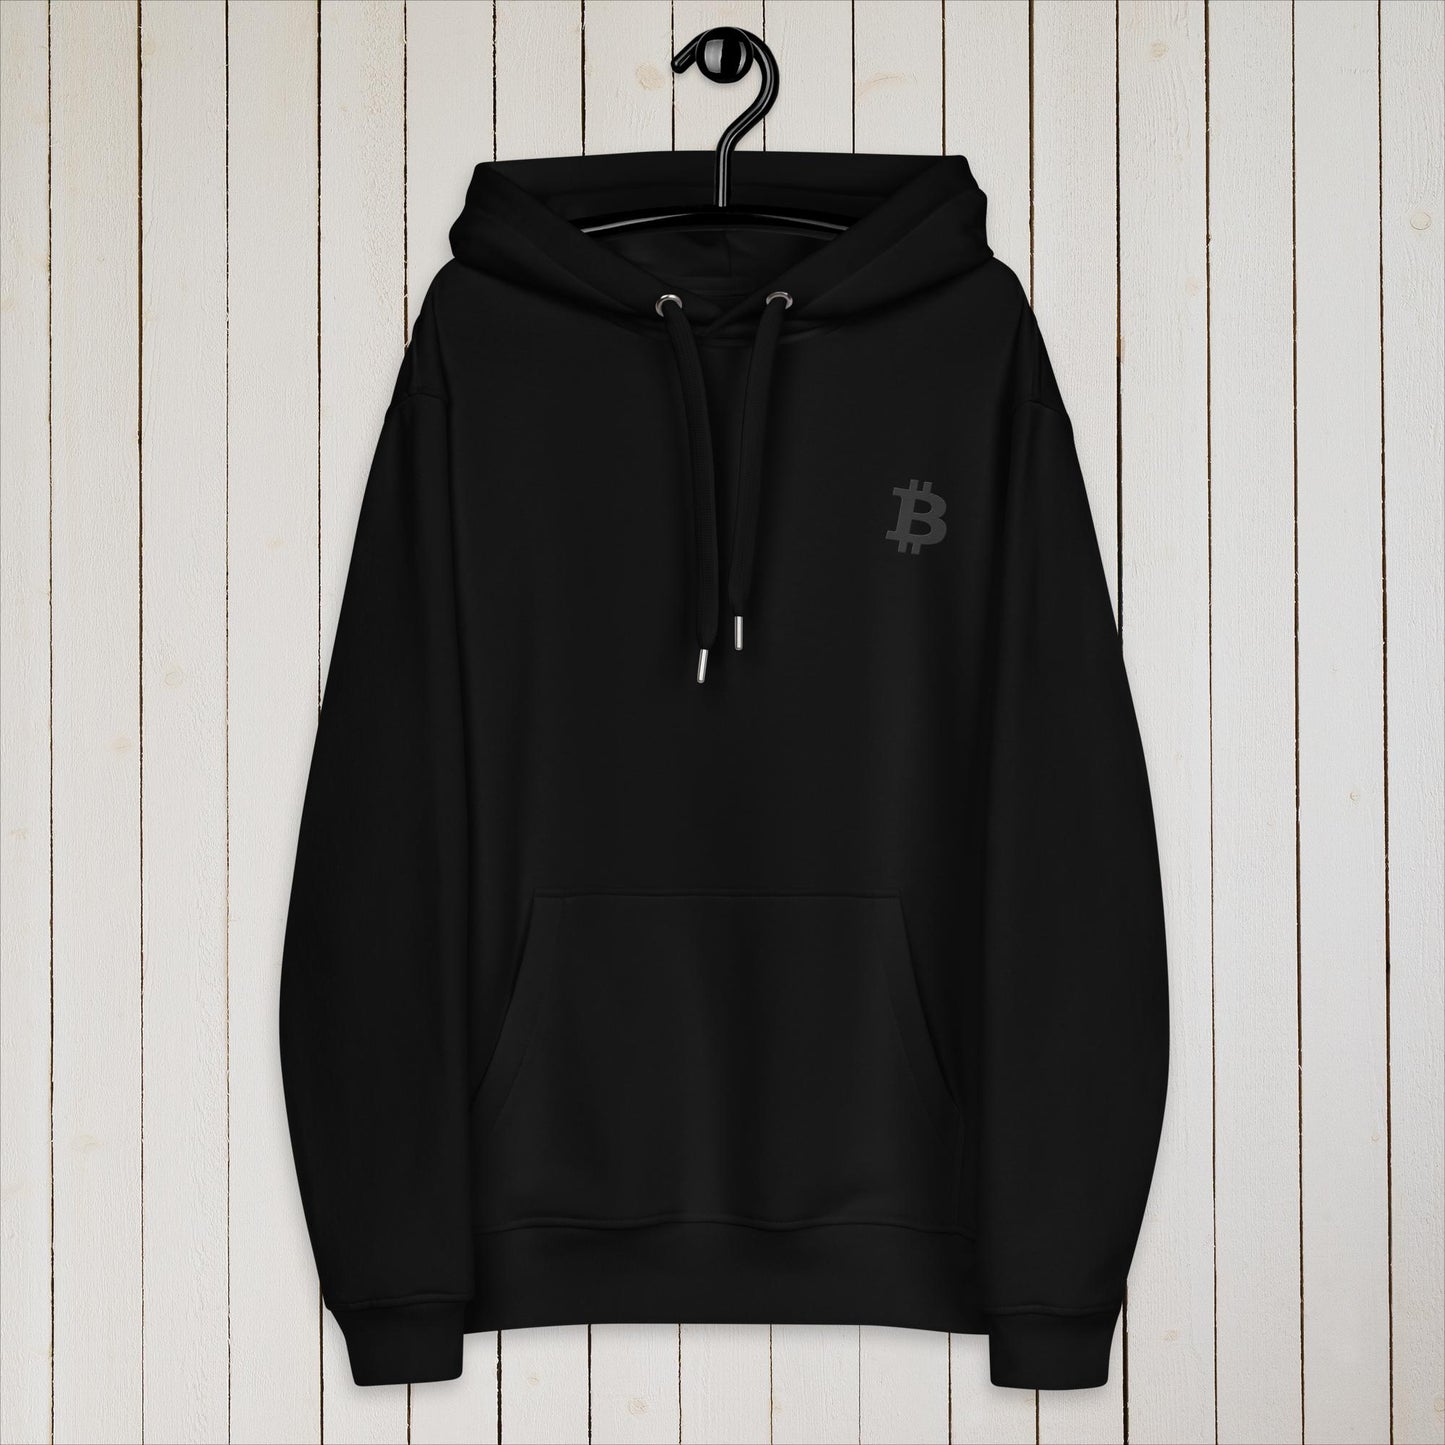 Bitcoin STEALTH Embroidered Hoodie